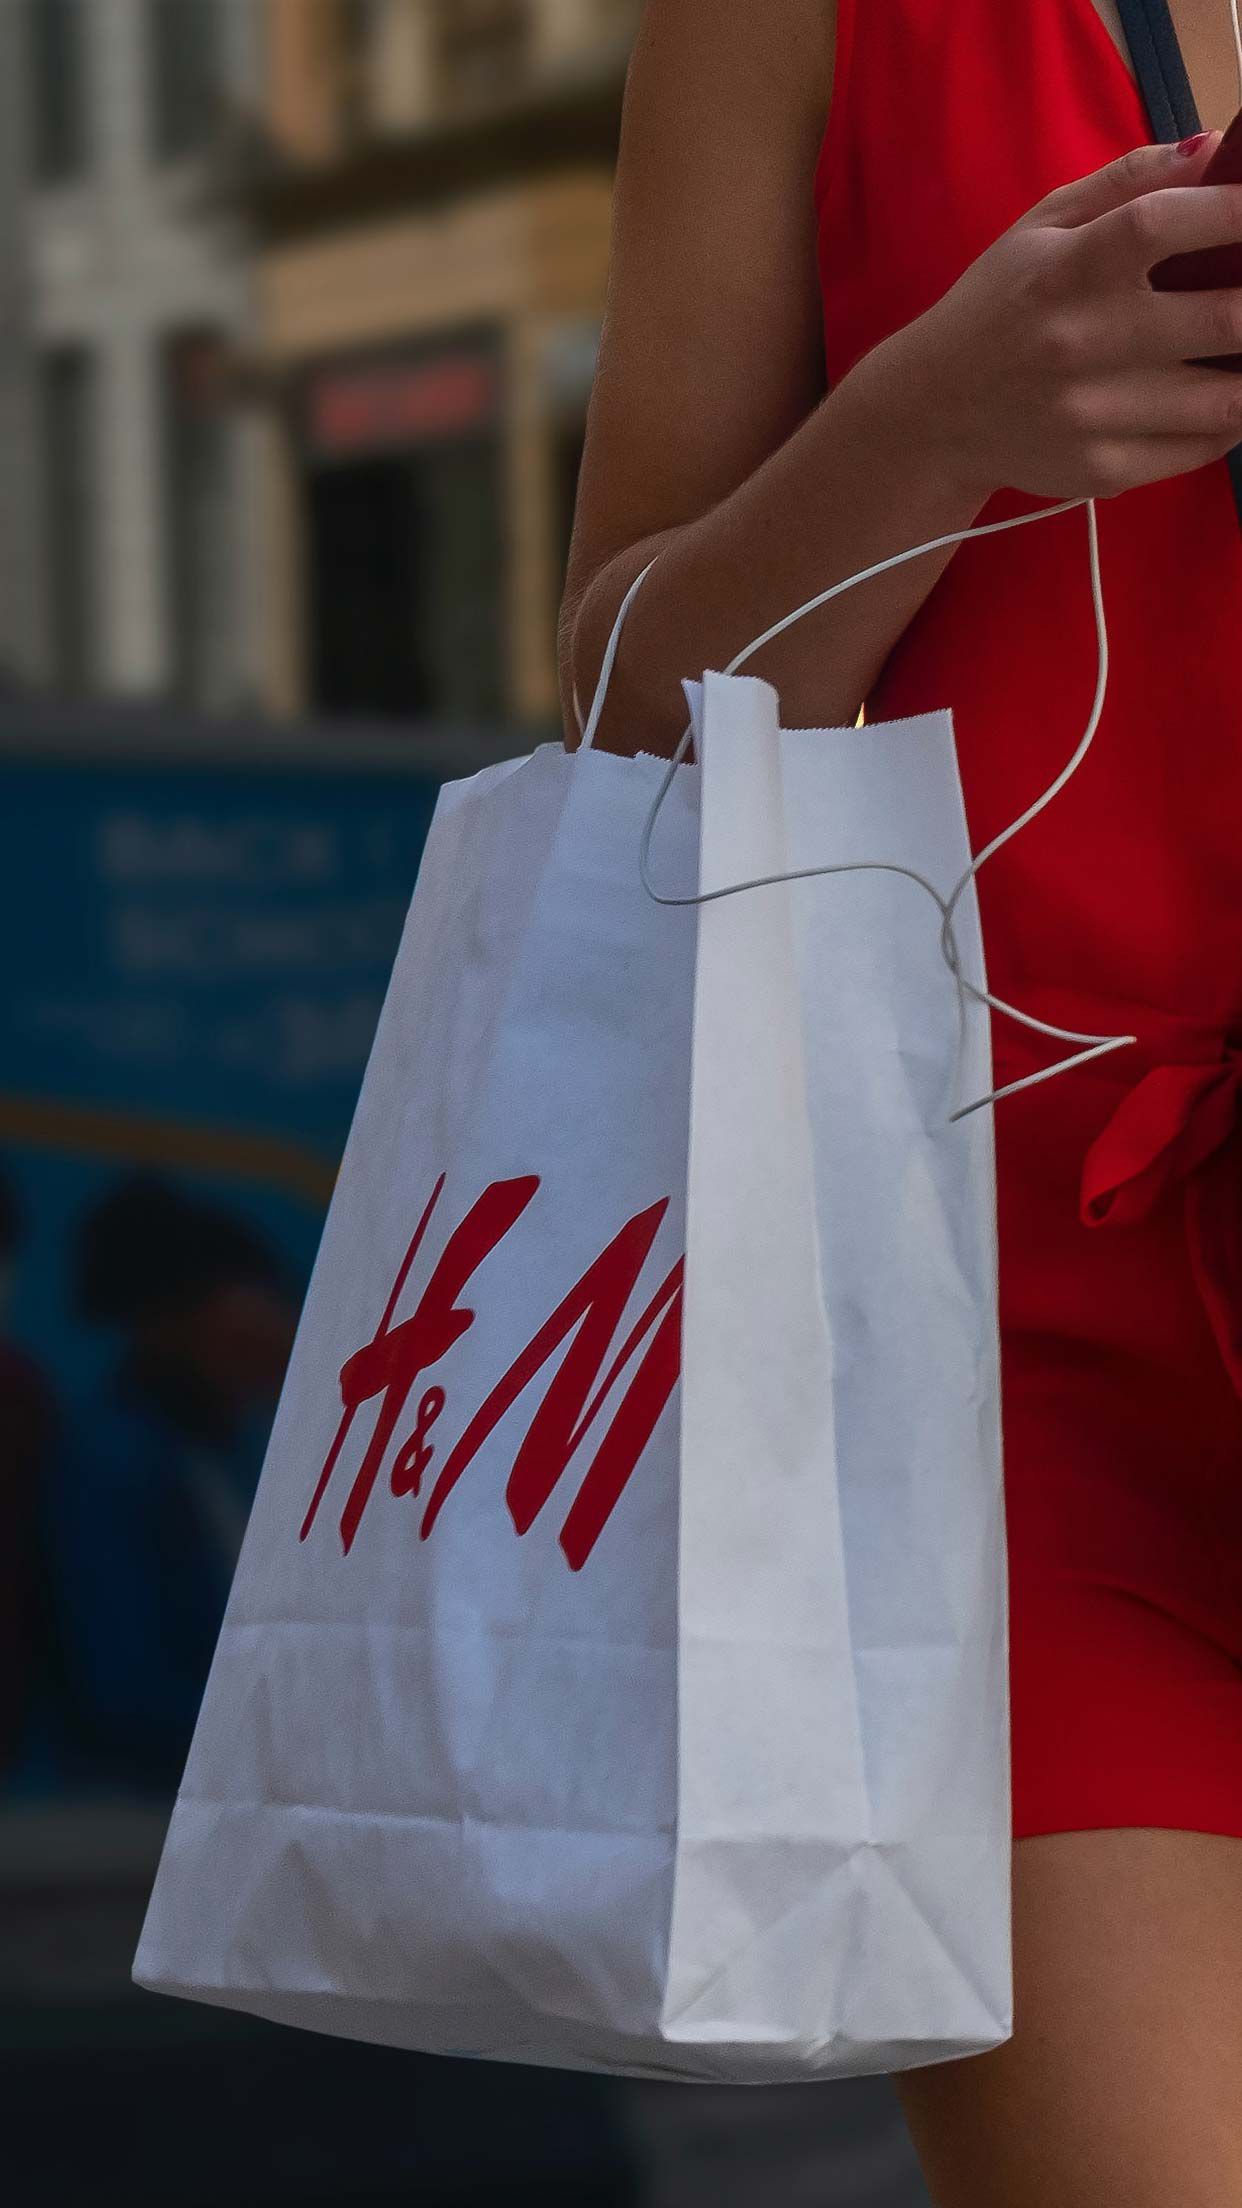 H&M to double investments this year to ramp up tech offerings